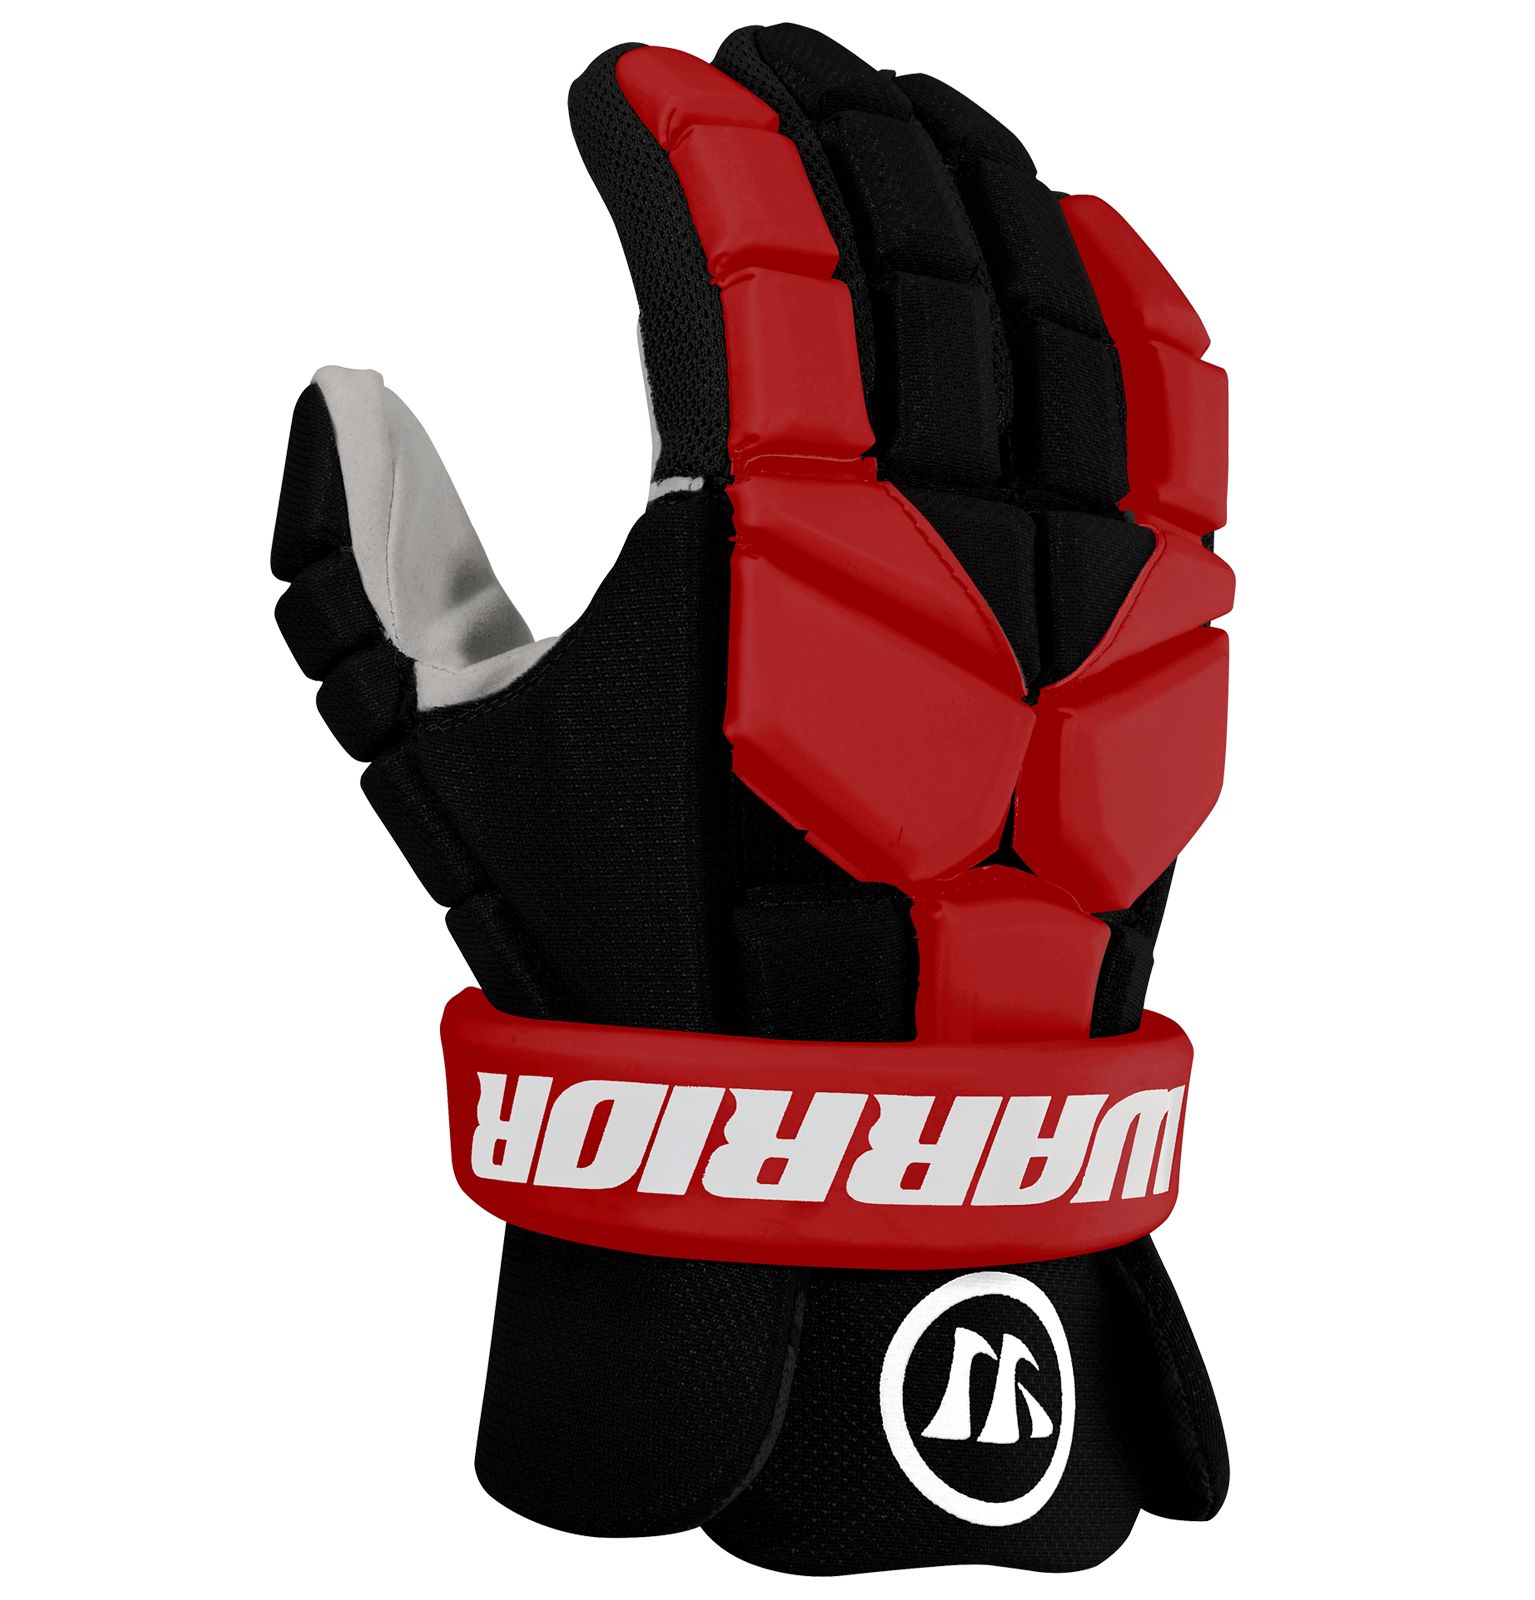 Fatboy Glove, Black with Red image number 0